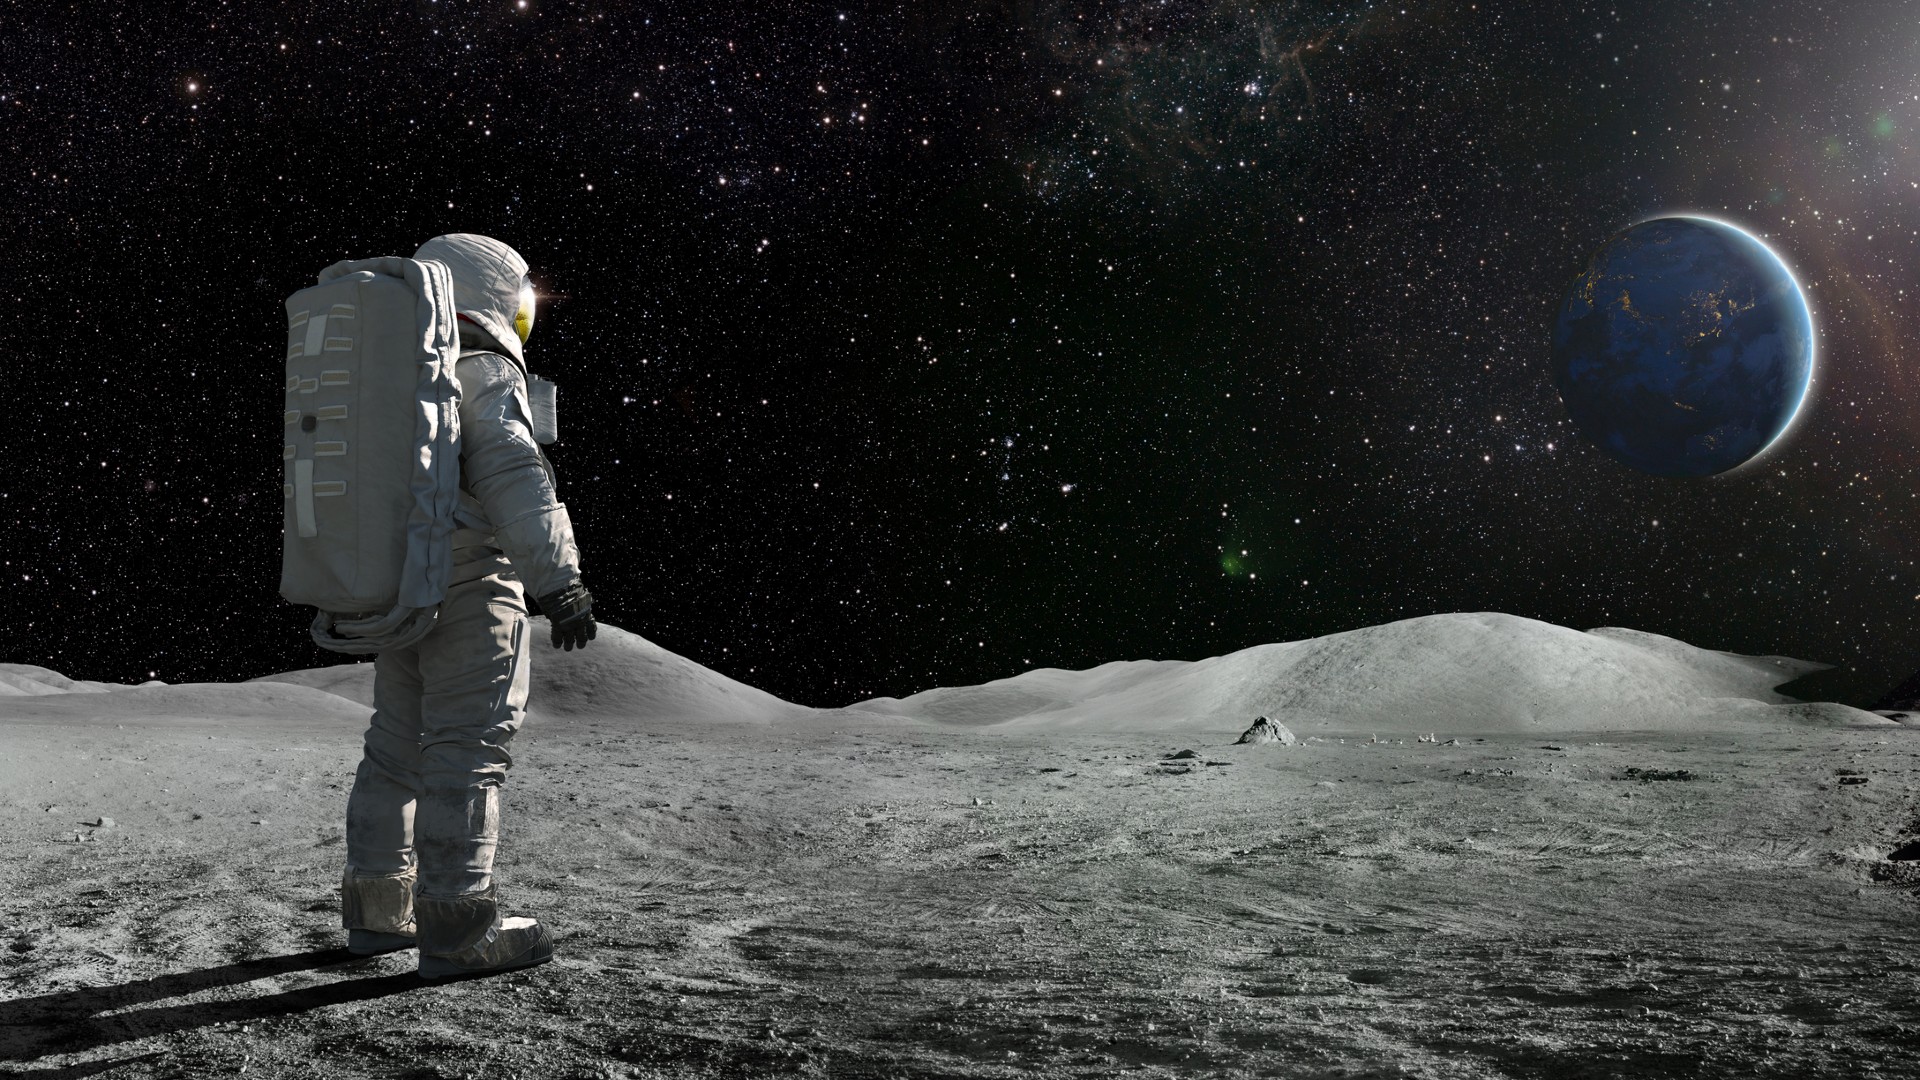 Astronauts on the moon could stay fit by running in a Wheel of Death Space